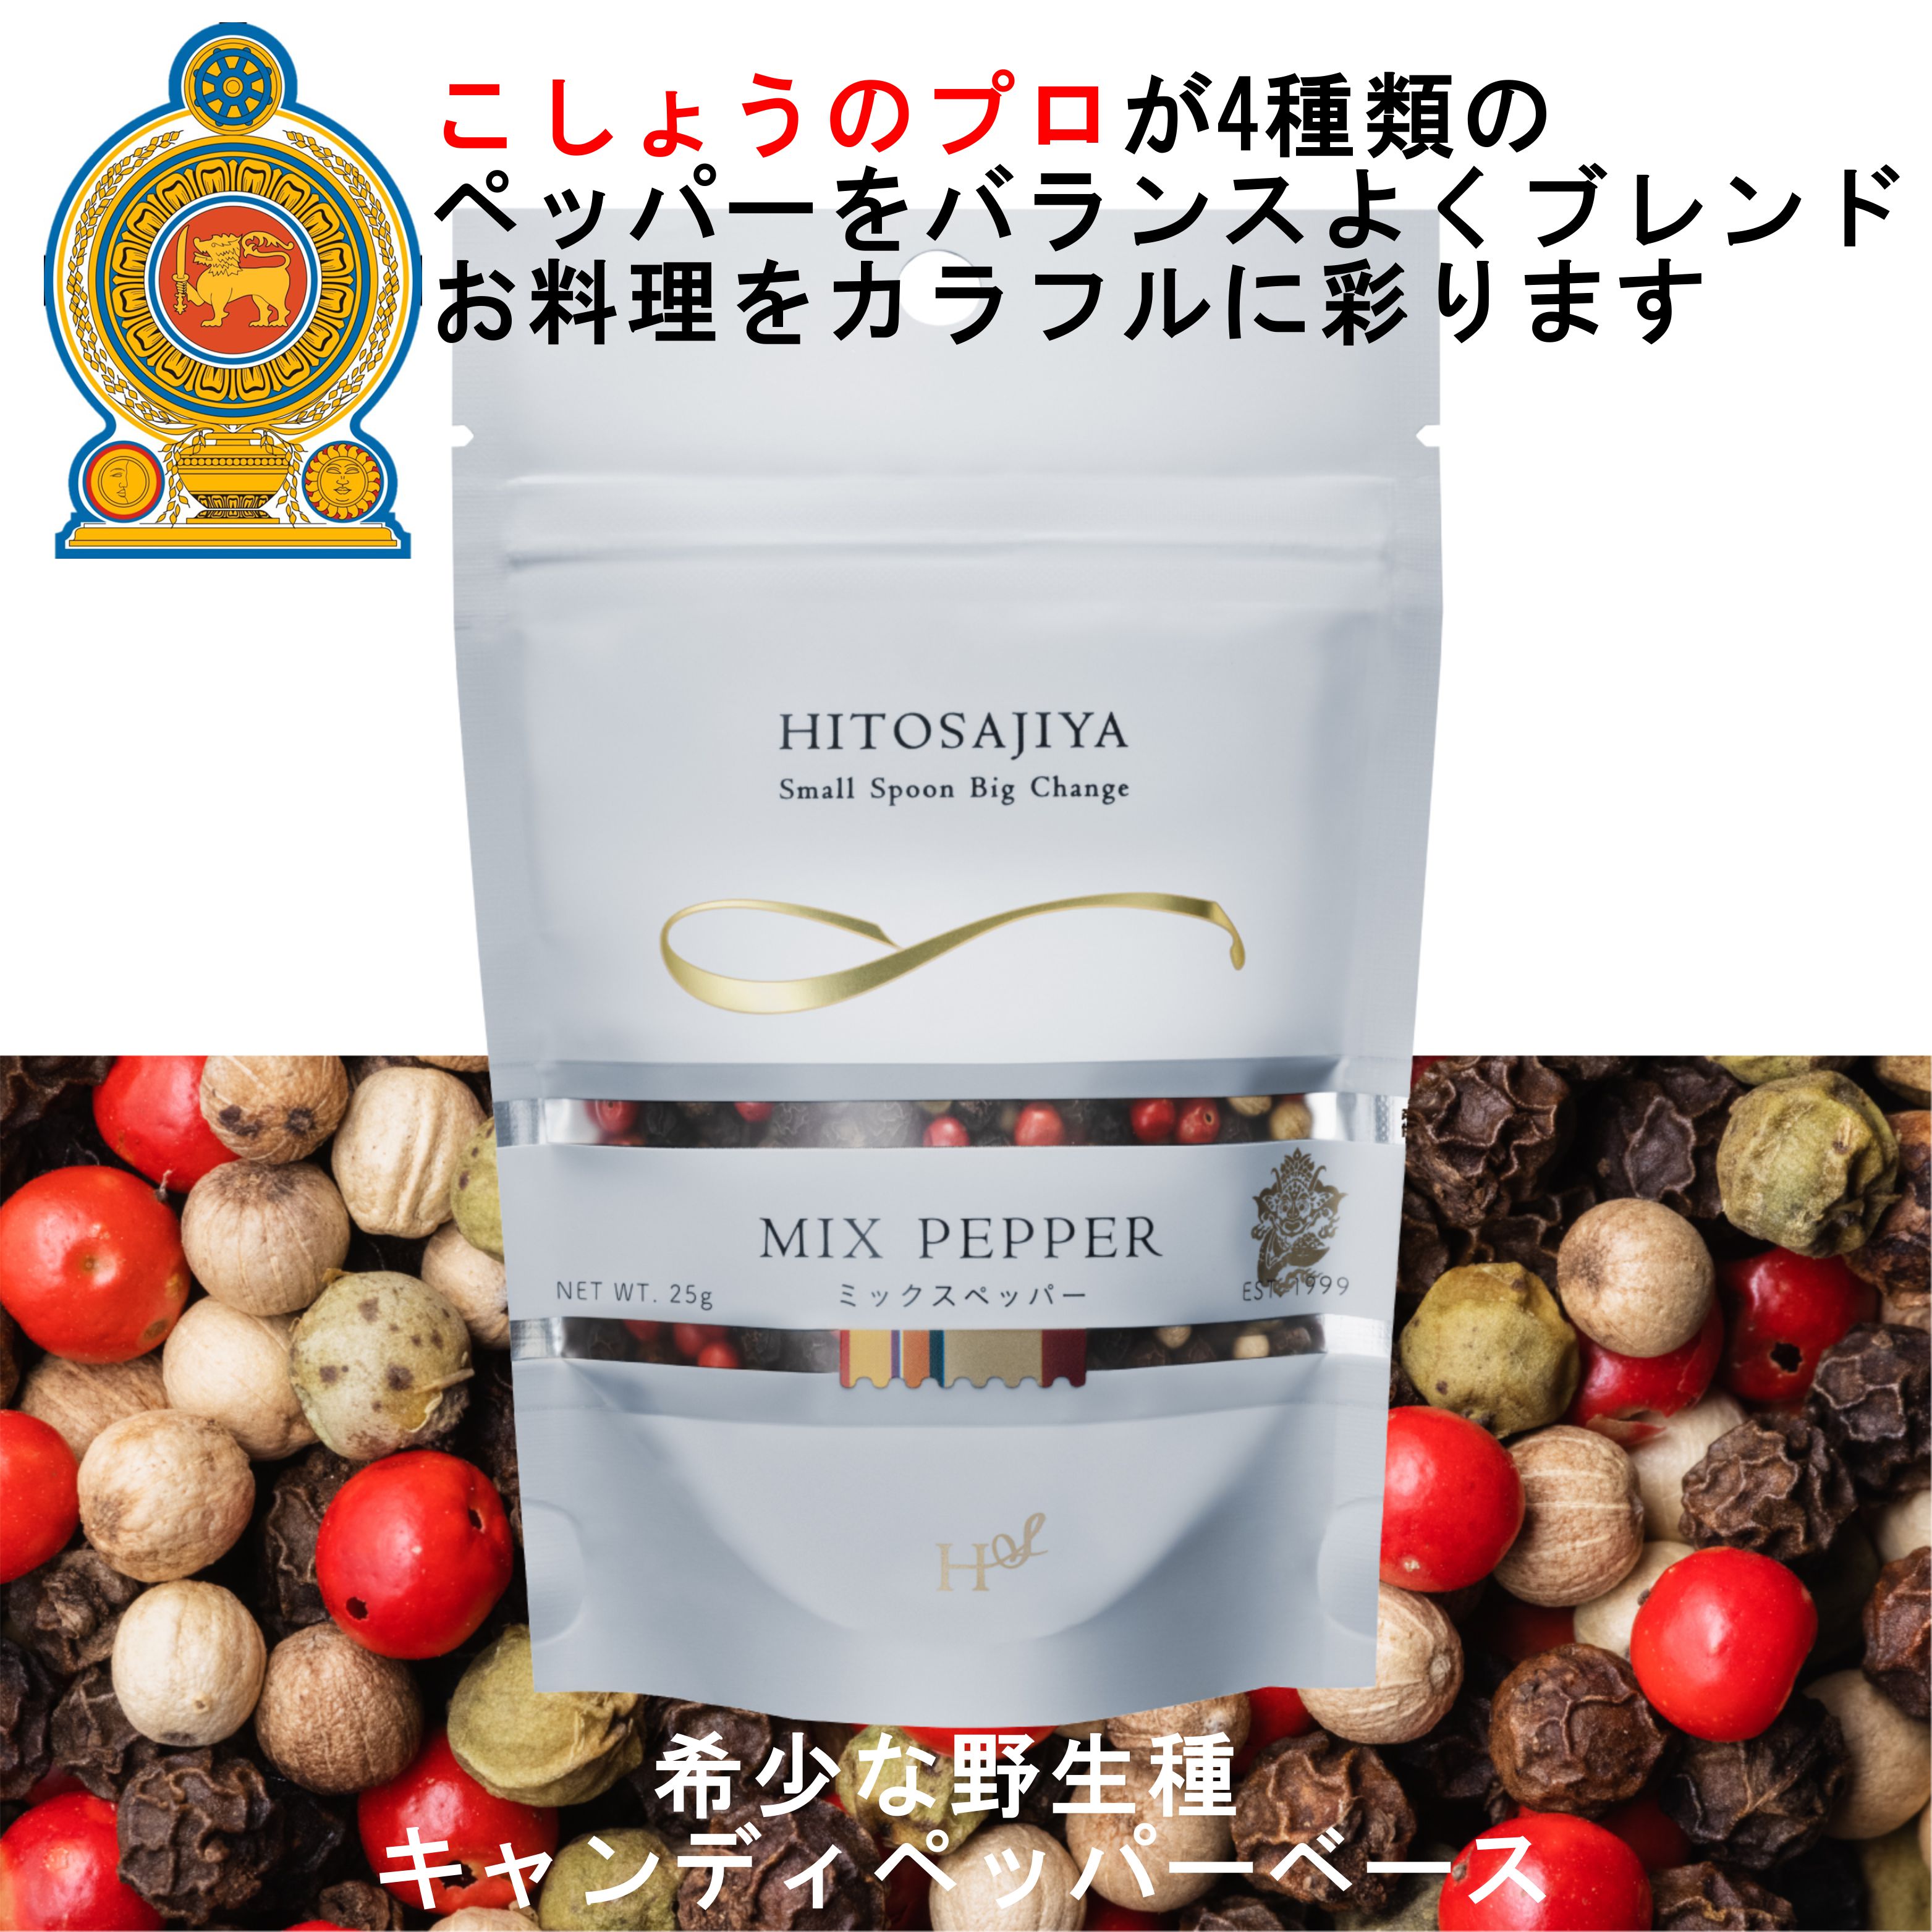  Mix pepper hole lami Zip entering 25gmatsuko. .. not world shoe ichila vi to. introduction ..... Pro . selection . top class .. our shop. standard popular commodity 